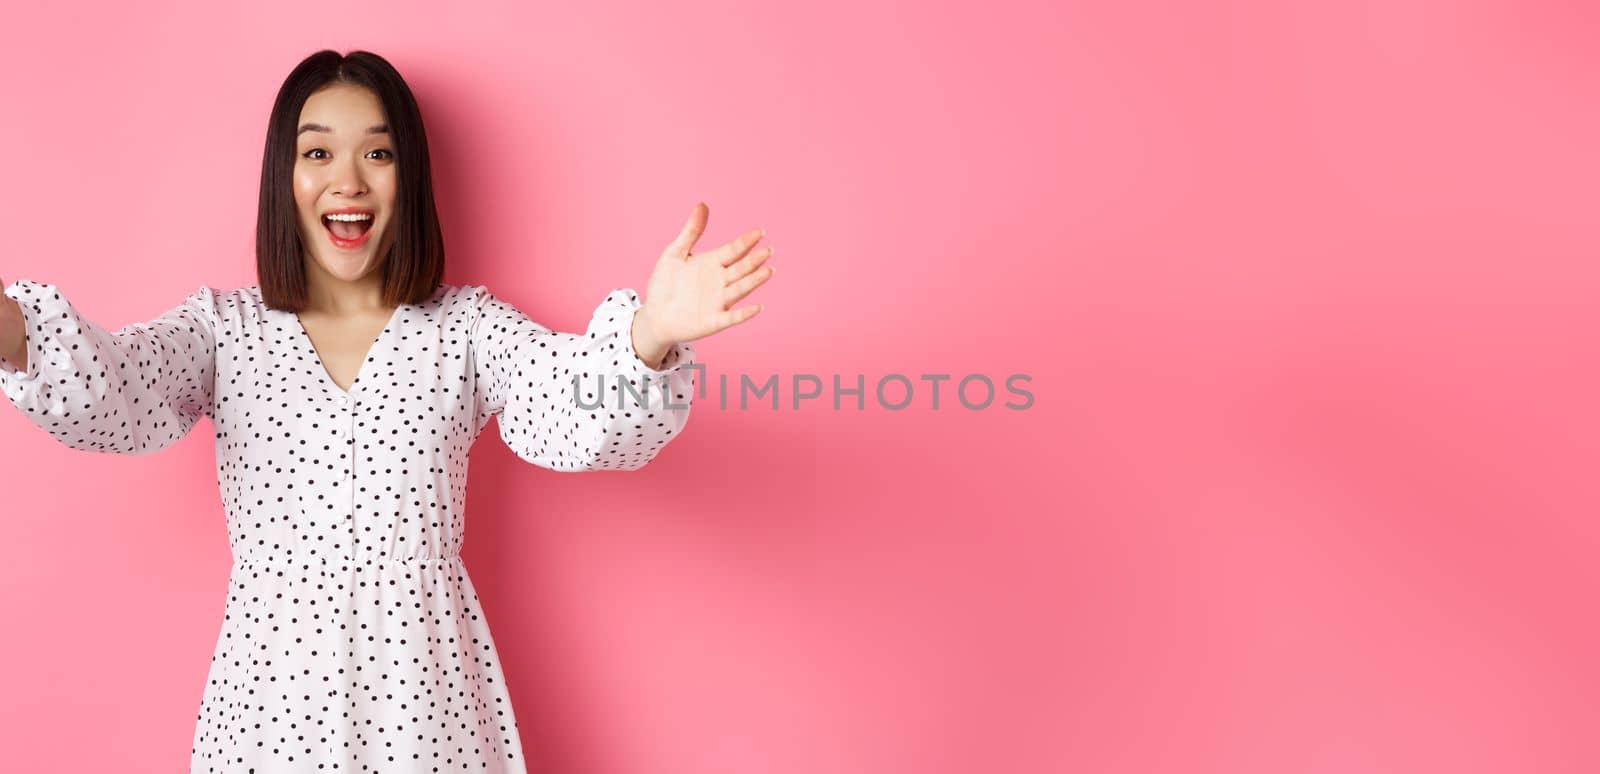 Happy asian girl stretching hands to camera, reaching for hug, smiling and wanting to hold something, standing over pink background in dress.